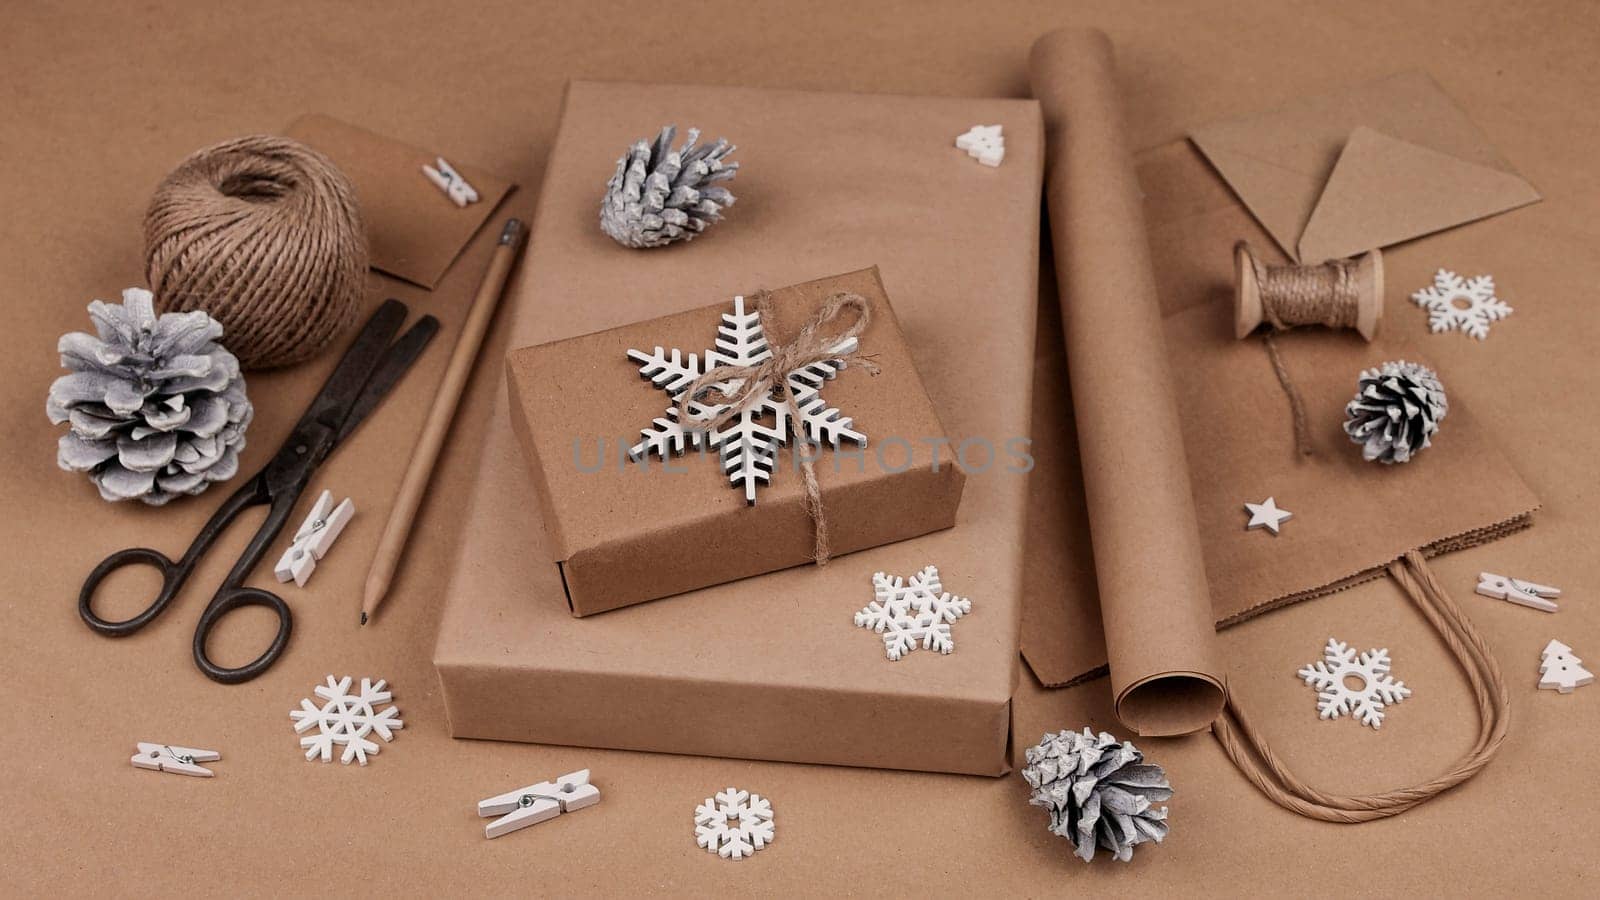 Packing Christmas gifts in brown paper by BreakingTheWalls